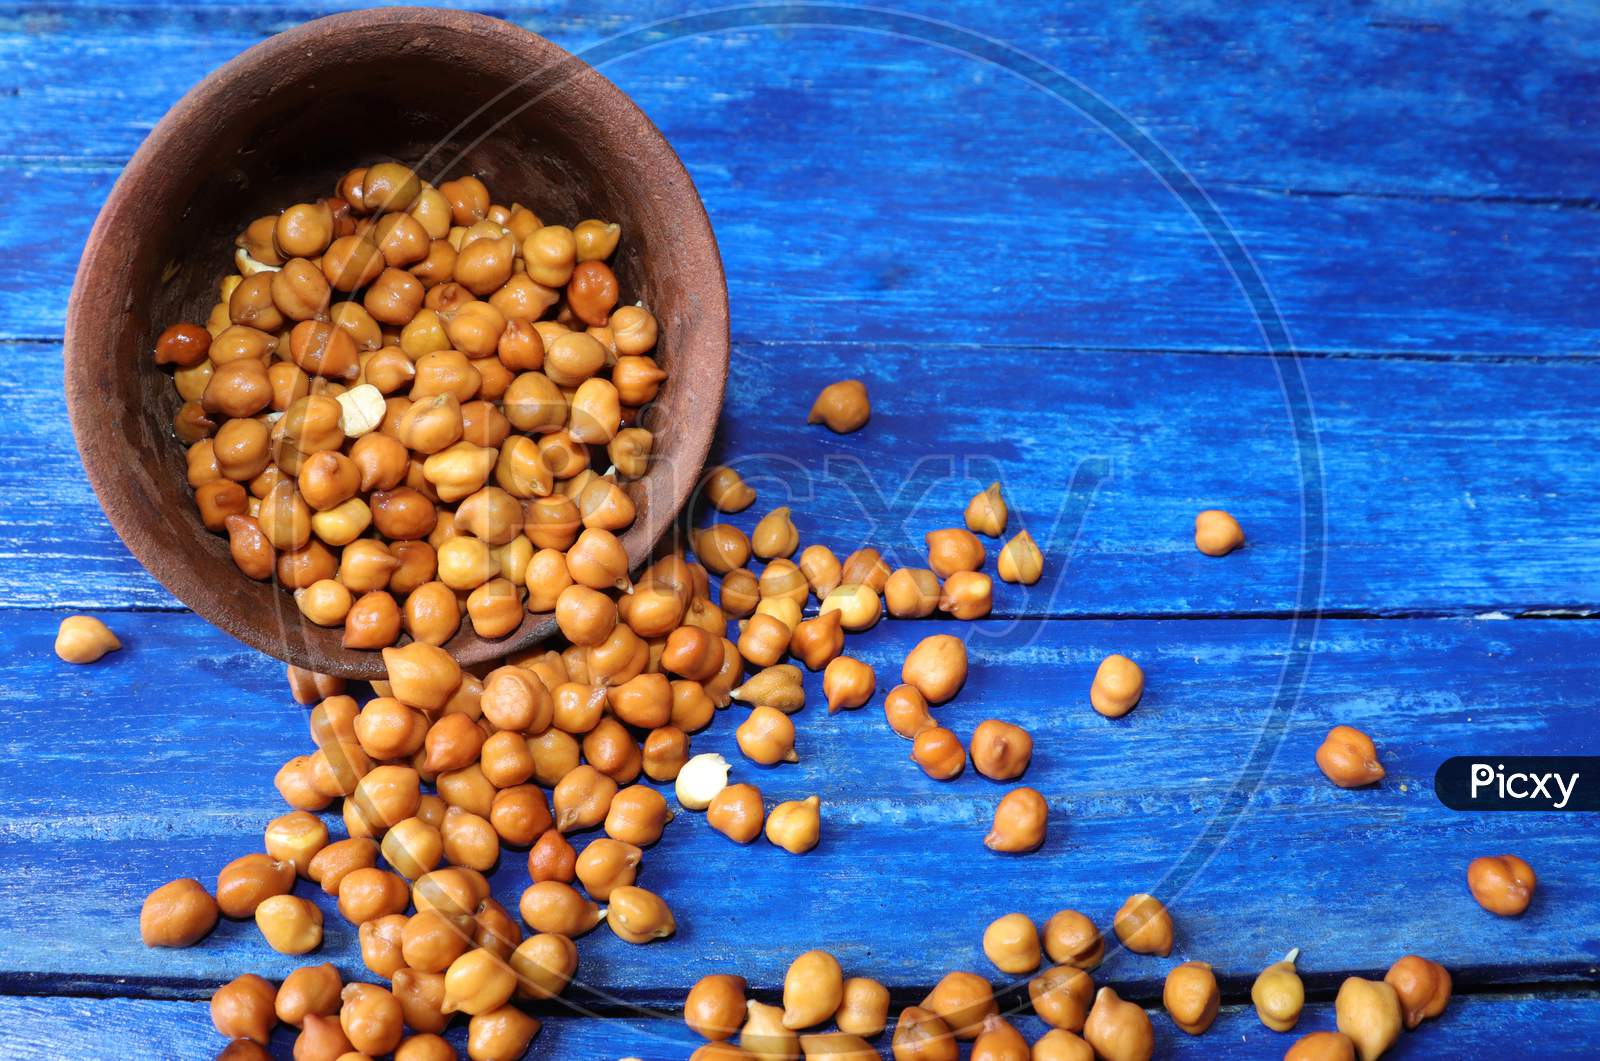 Wet Chickpea Or Garbanzo Bean Coming Out Of A Clay Bowl Isolated On Blue Colored Wooden Background With Copy Space